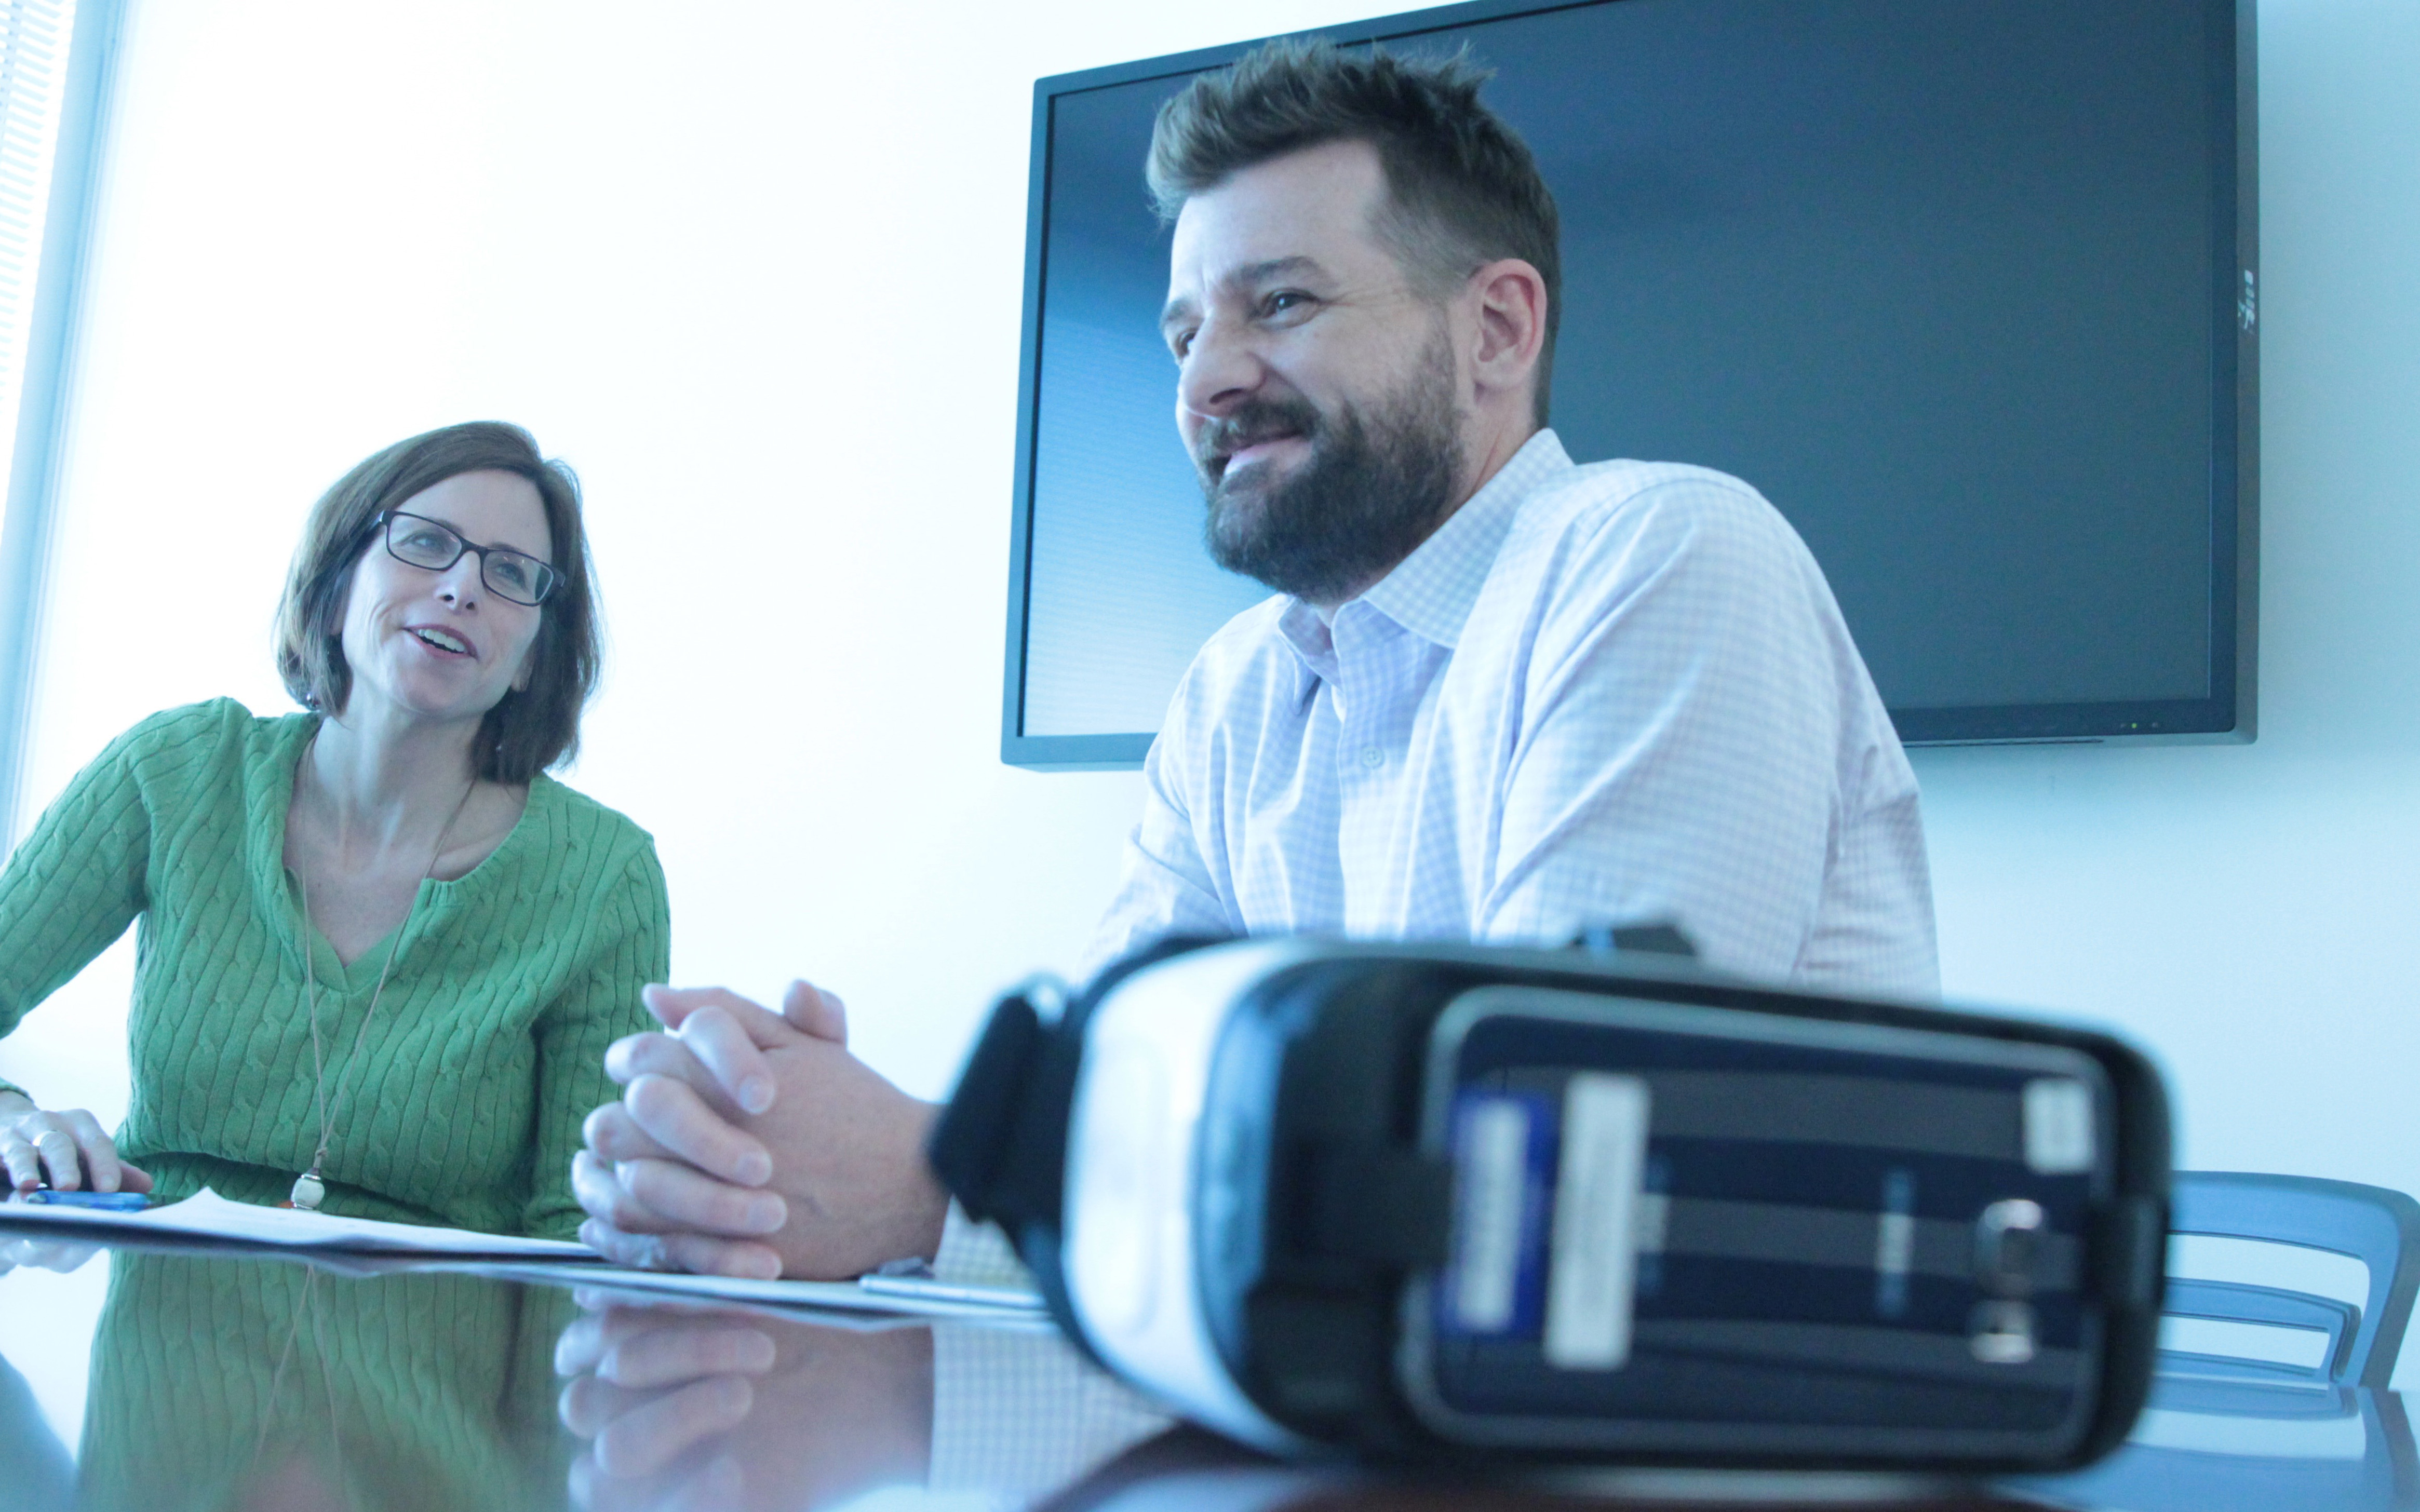 Jamie Daer and Scott Dunn with the Arizona Office of Tourism discuss their virtual reality experience, which simulates mountain biking in Sedona and skydiving at the Grand Canyon. (Photo by Erica Apodaca/Cronkite News)